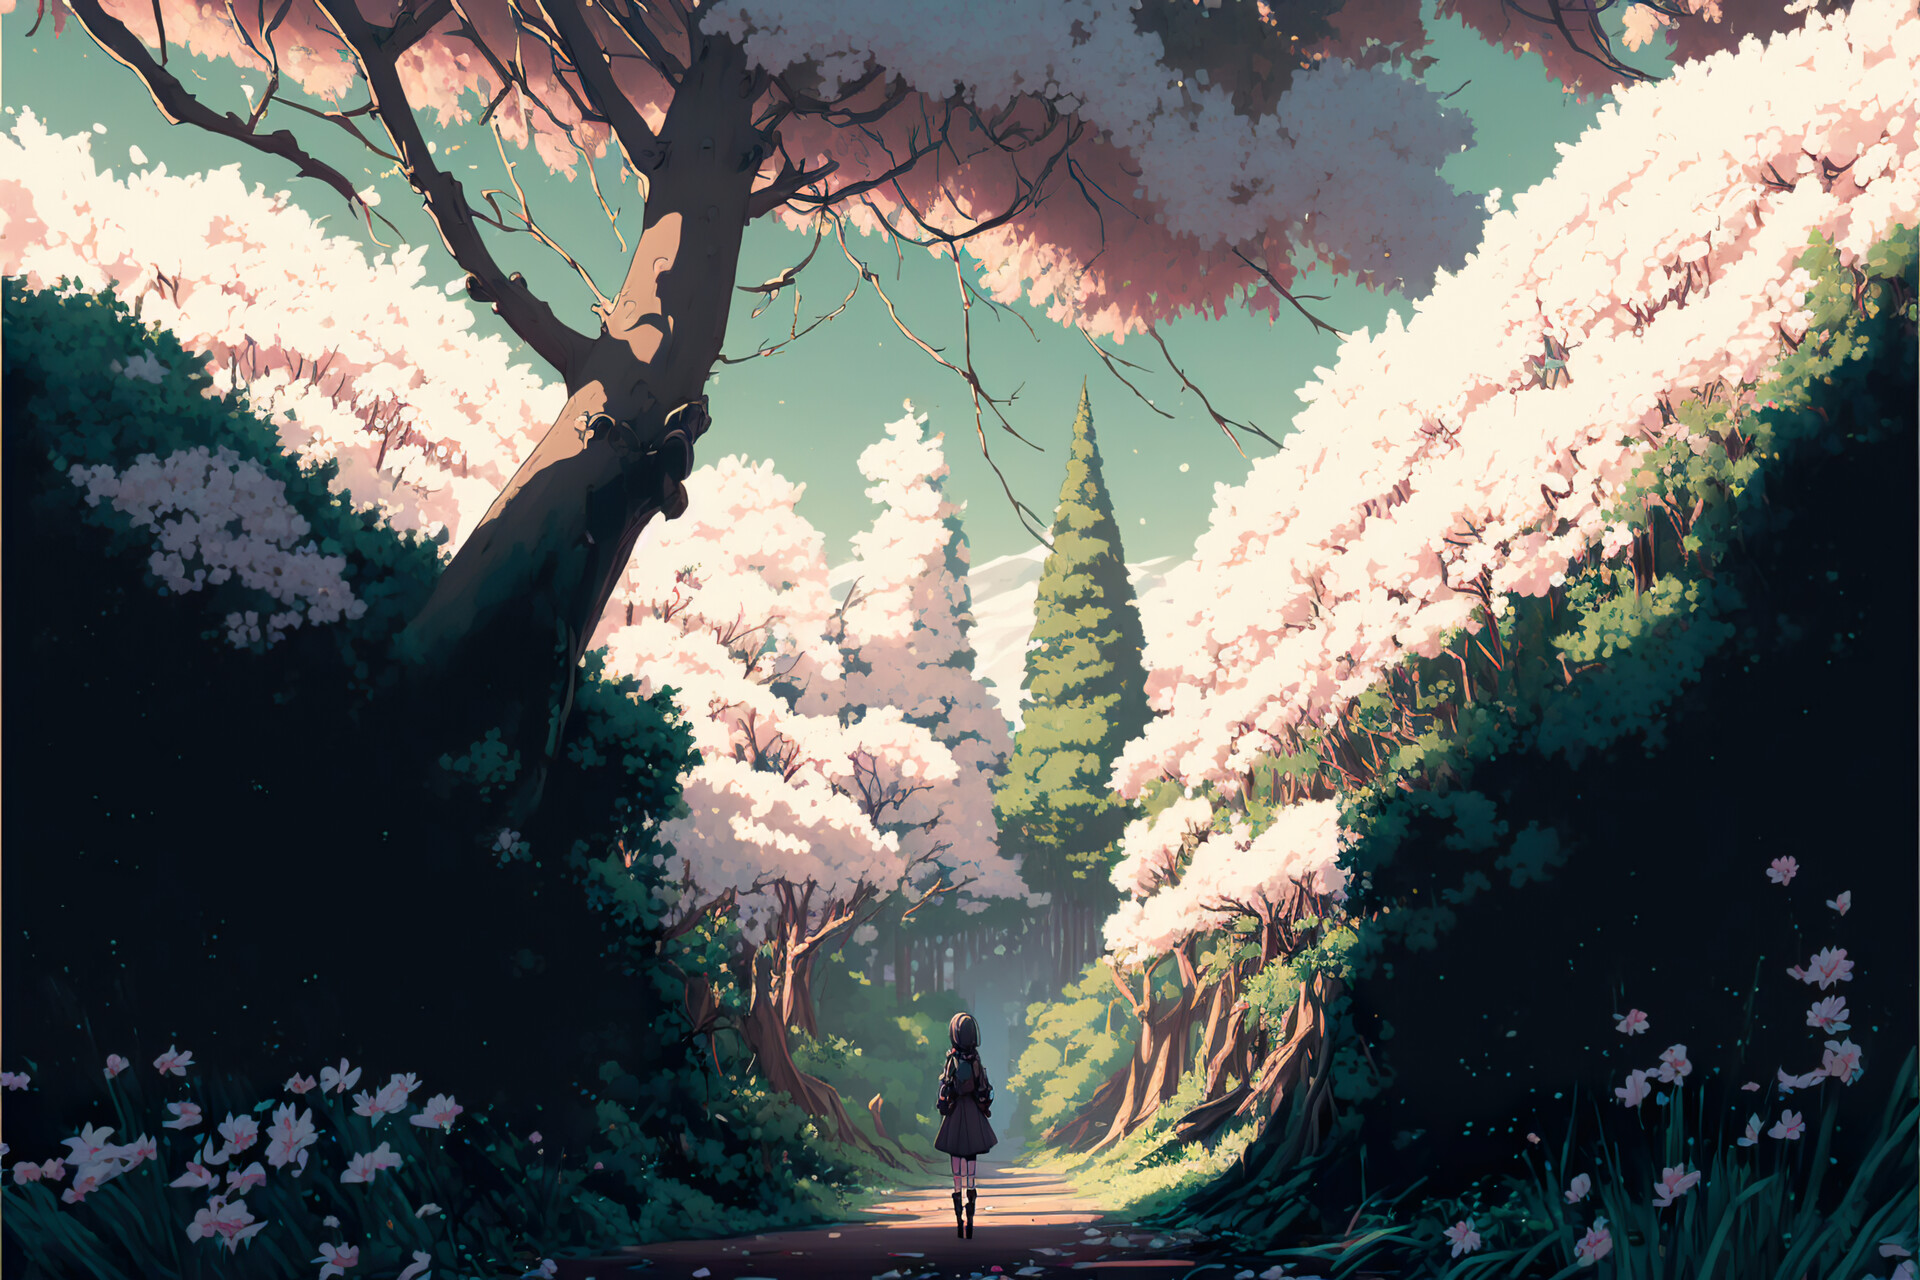 ArtStation - Anime girl surrounded by trees and flowers